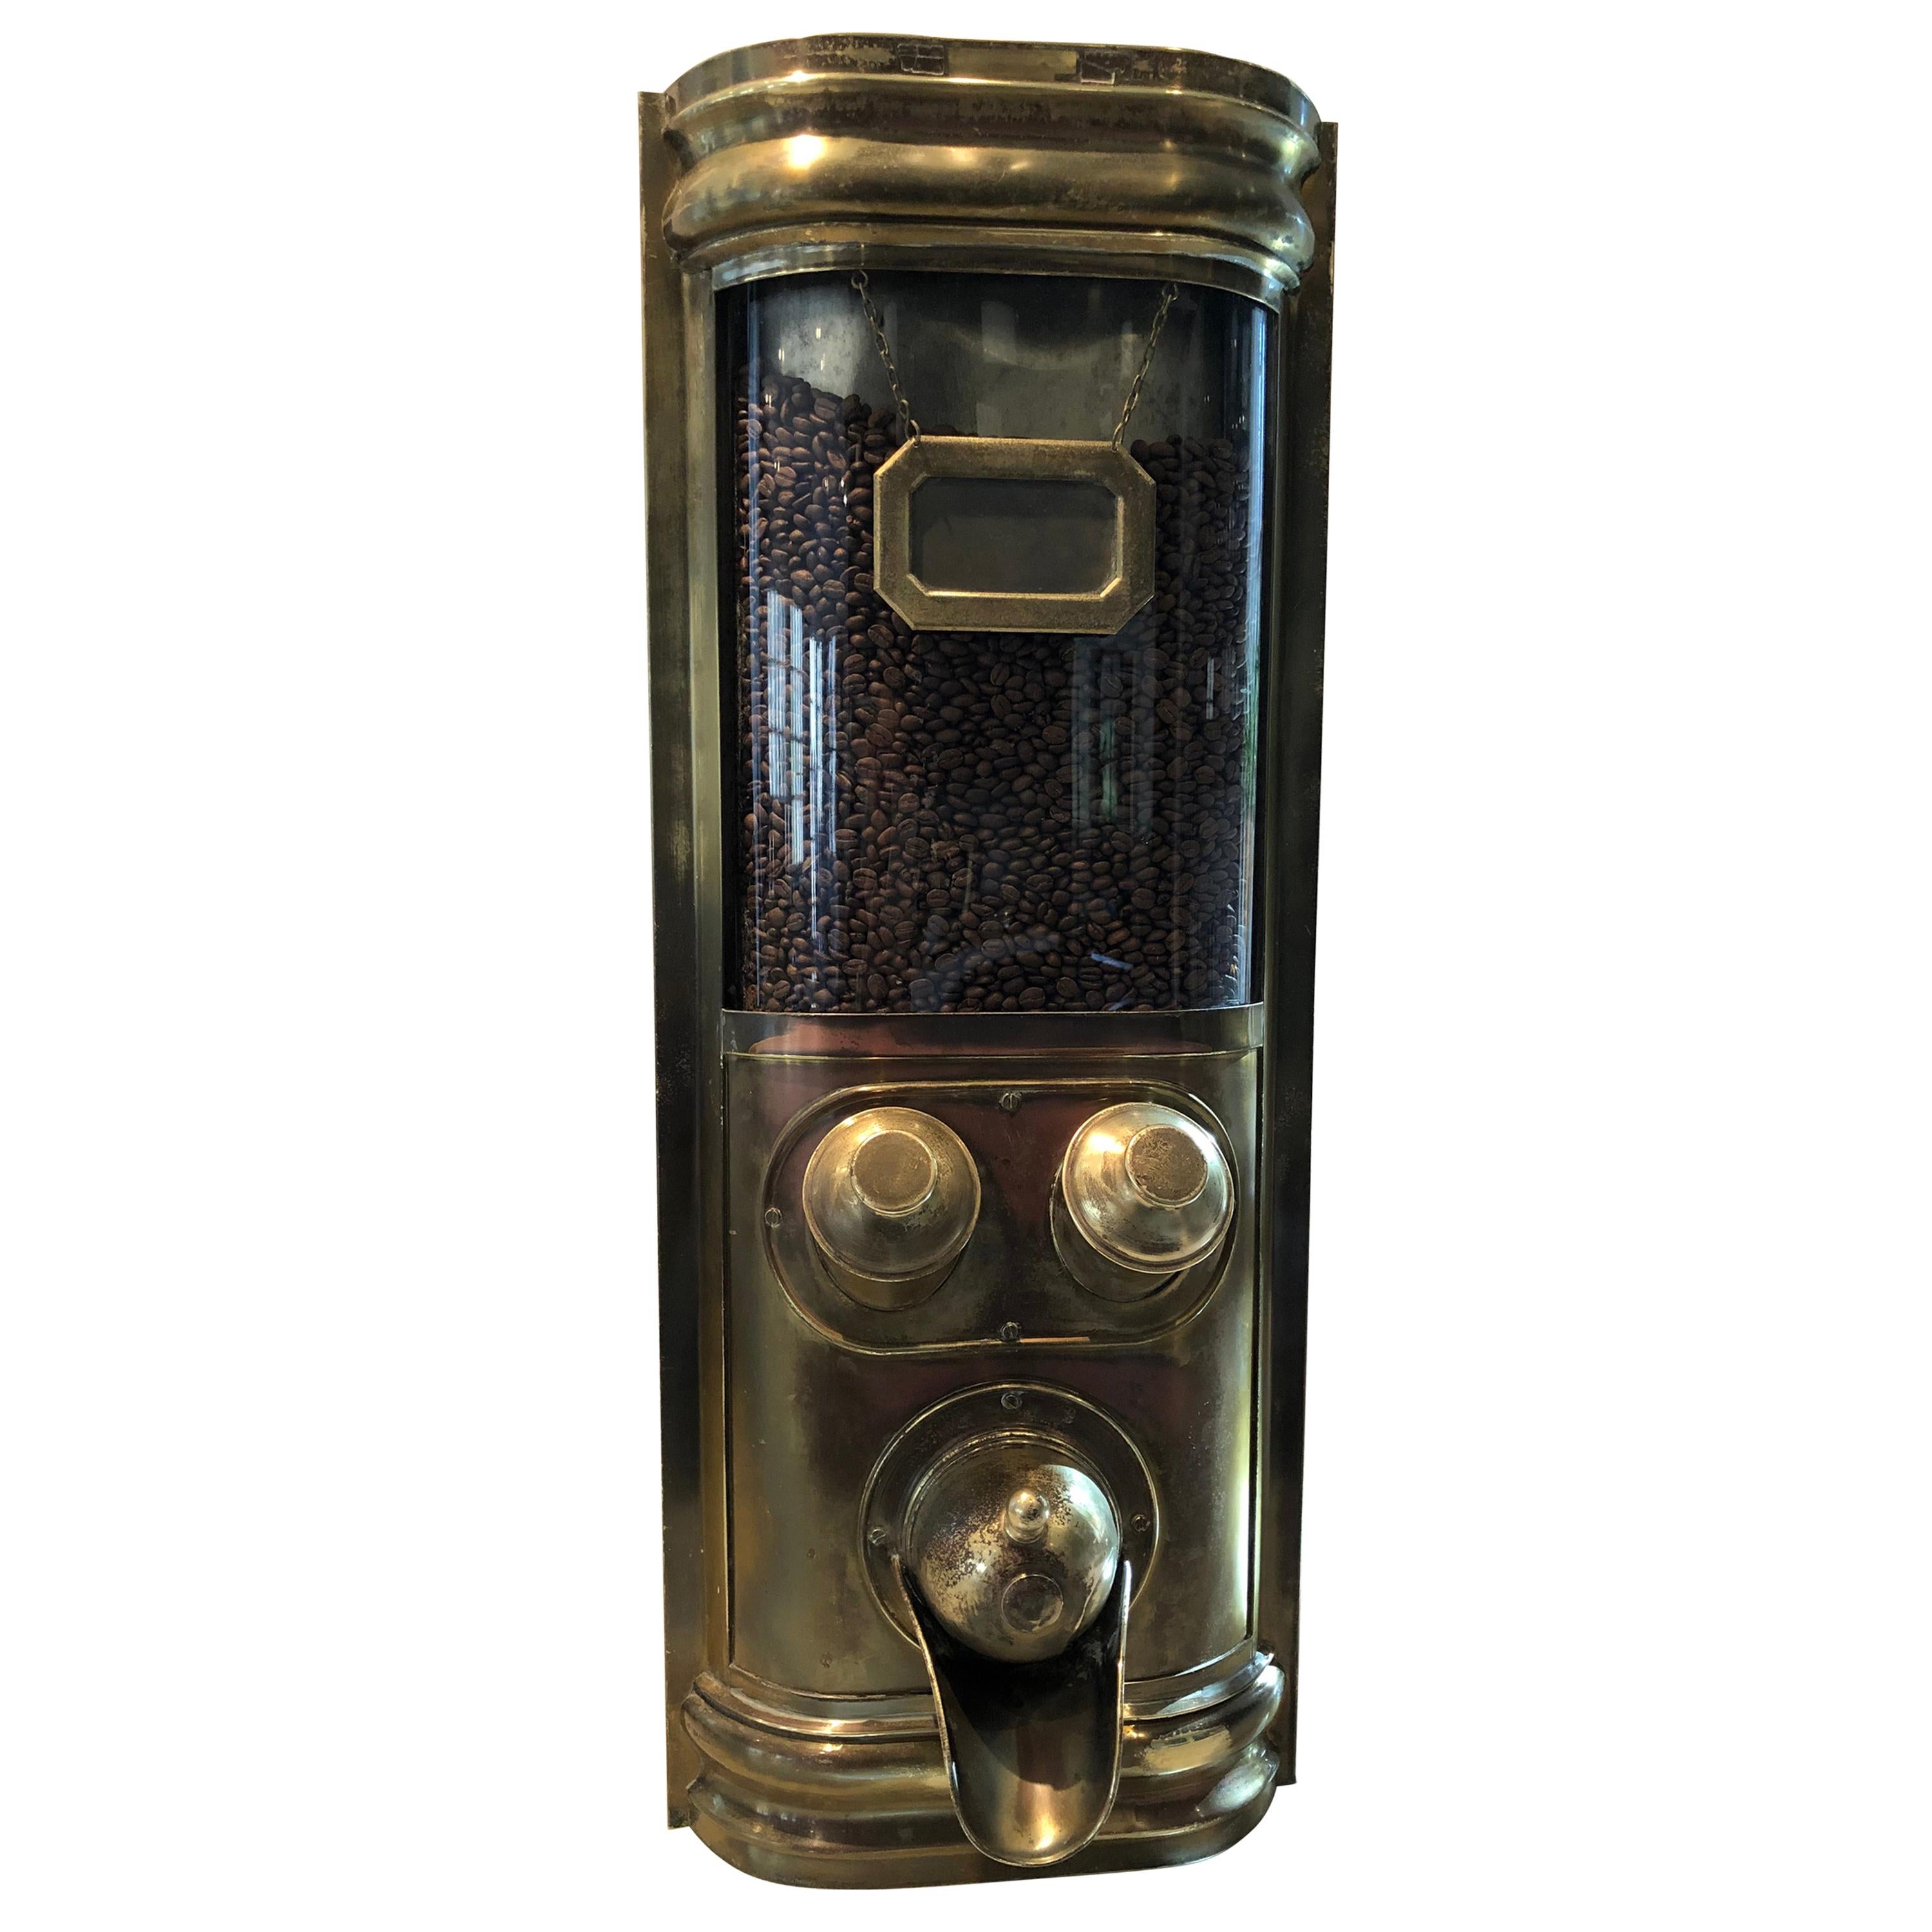 Handsome French Commercial Coffee Bean Dispenser in Brass